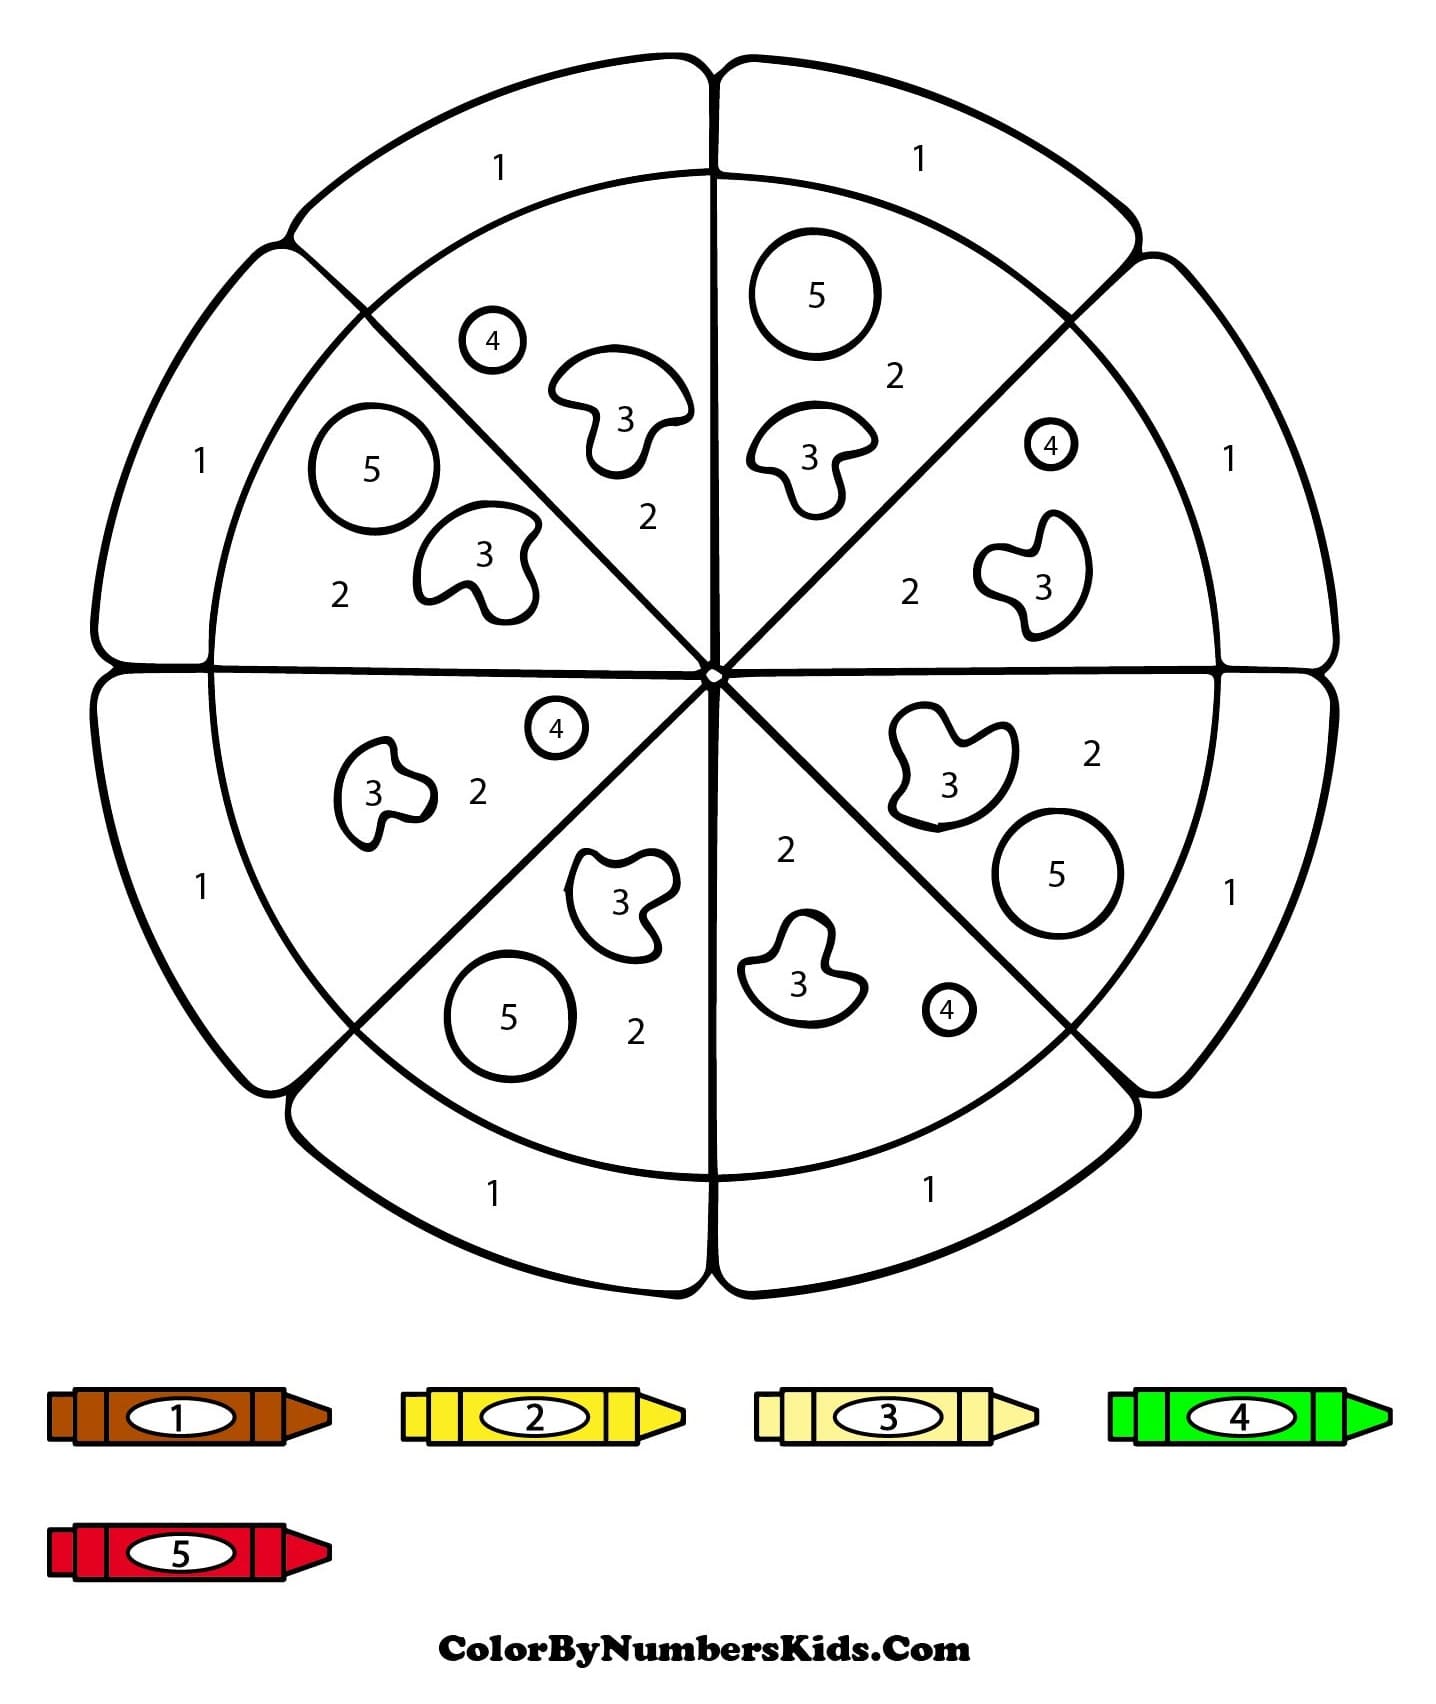 A Pizza Color By Number